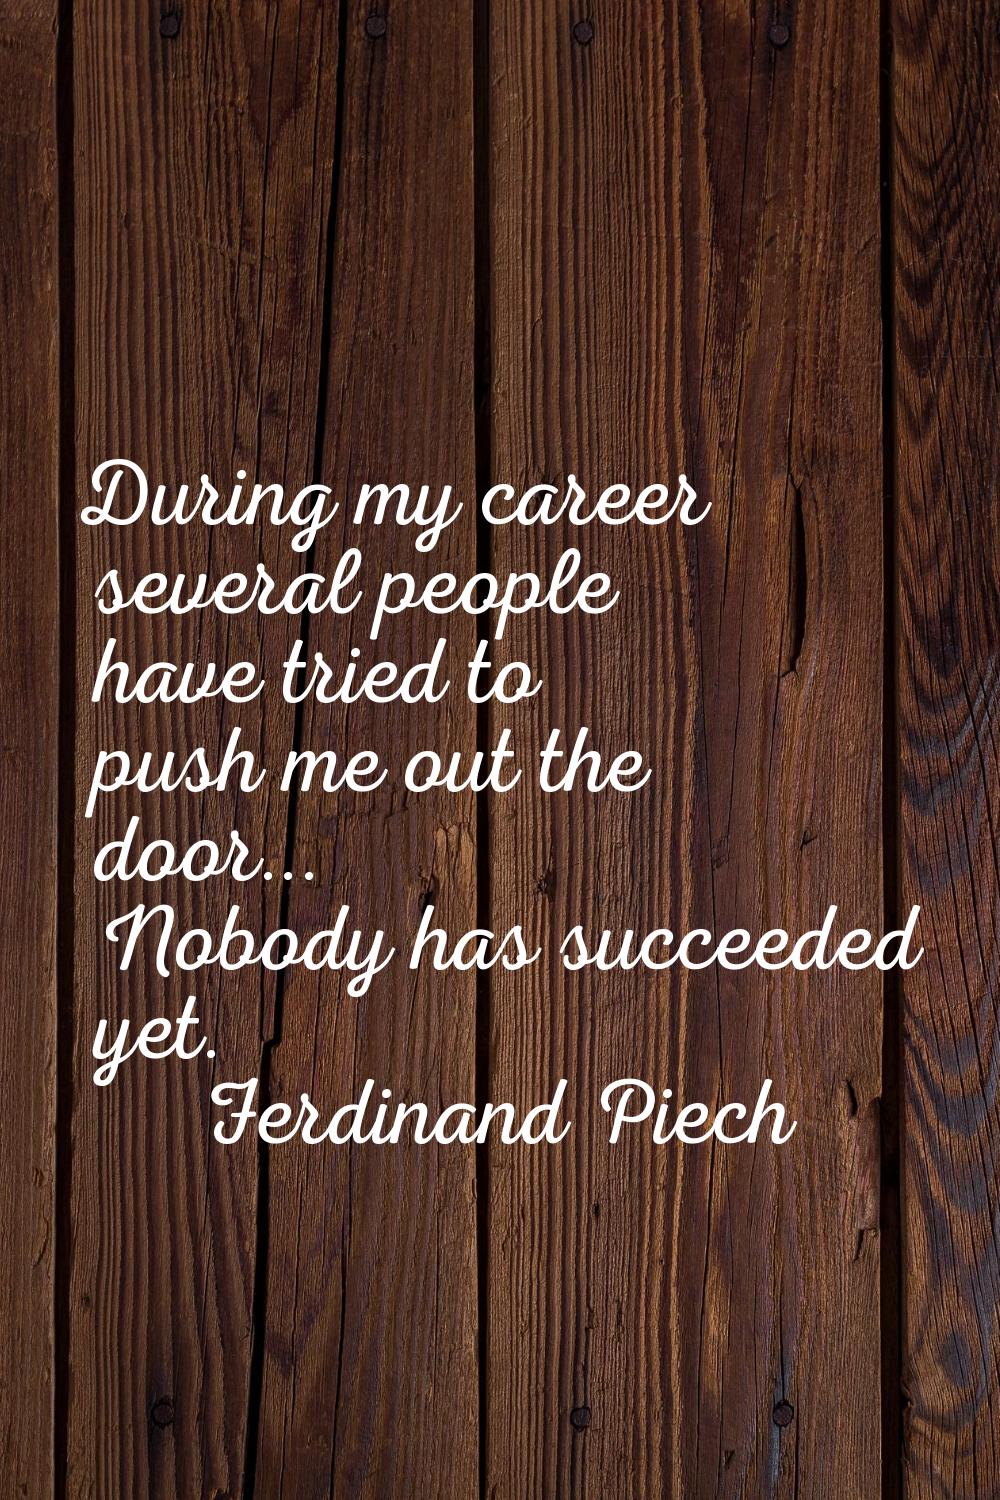 During my career several people have tried to push me out the door... Nobody has succeeded yet.